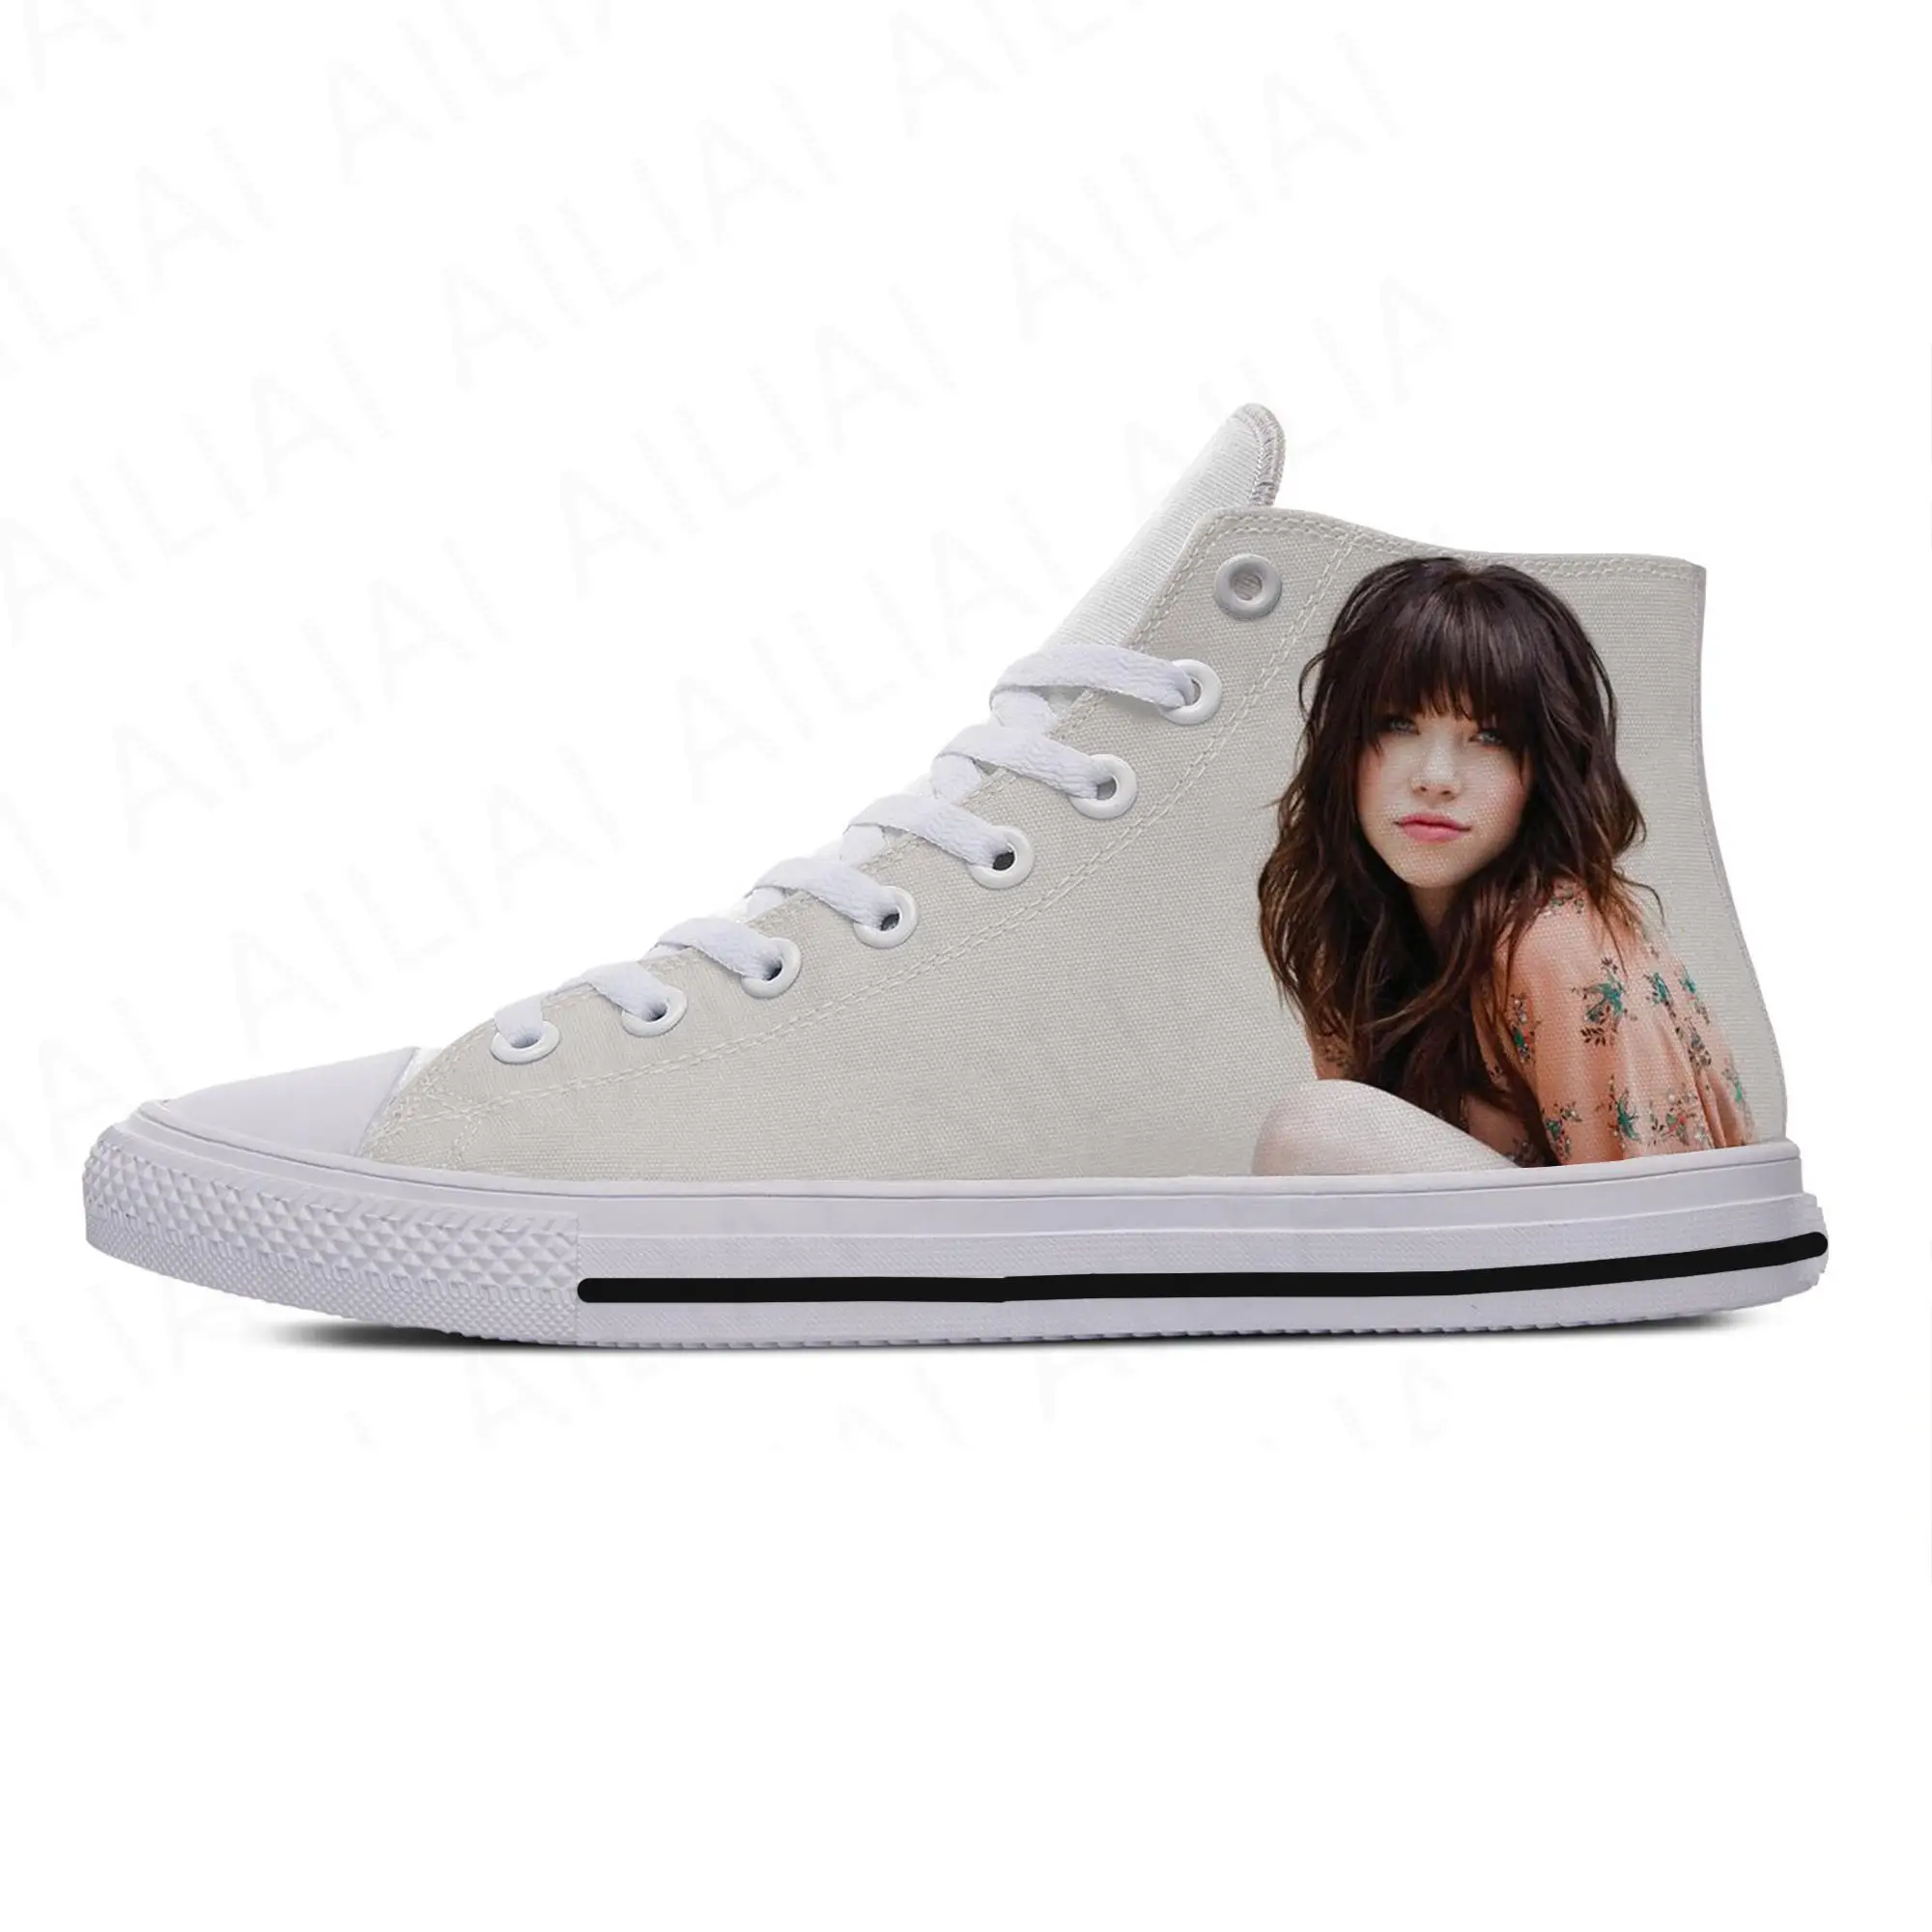 

Hot Cool 3D Summer Fashion Pop Funny Summer High Quality Sneakers Casual Shoes Men Women Carly Rae Jepsen High Top Board Shoes